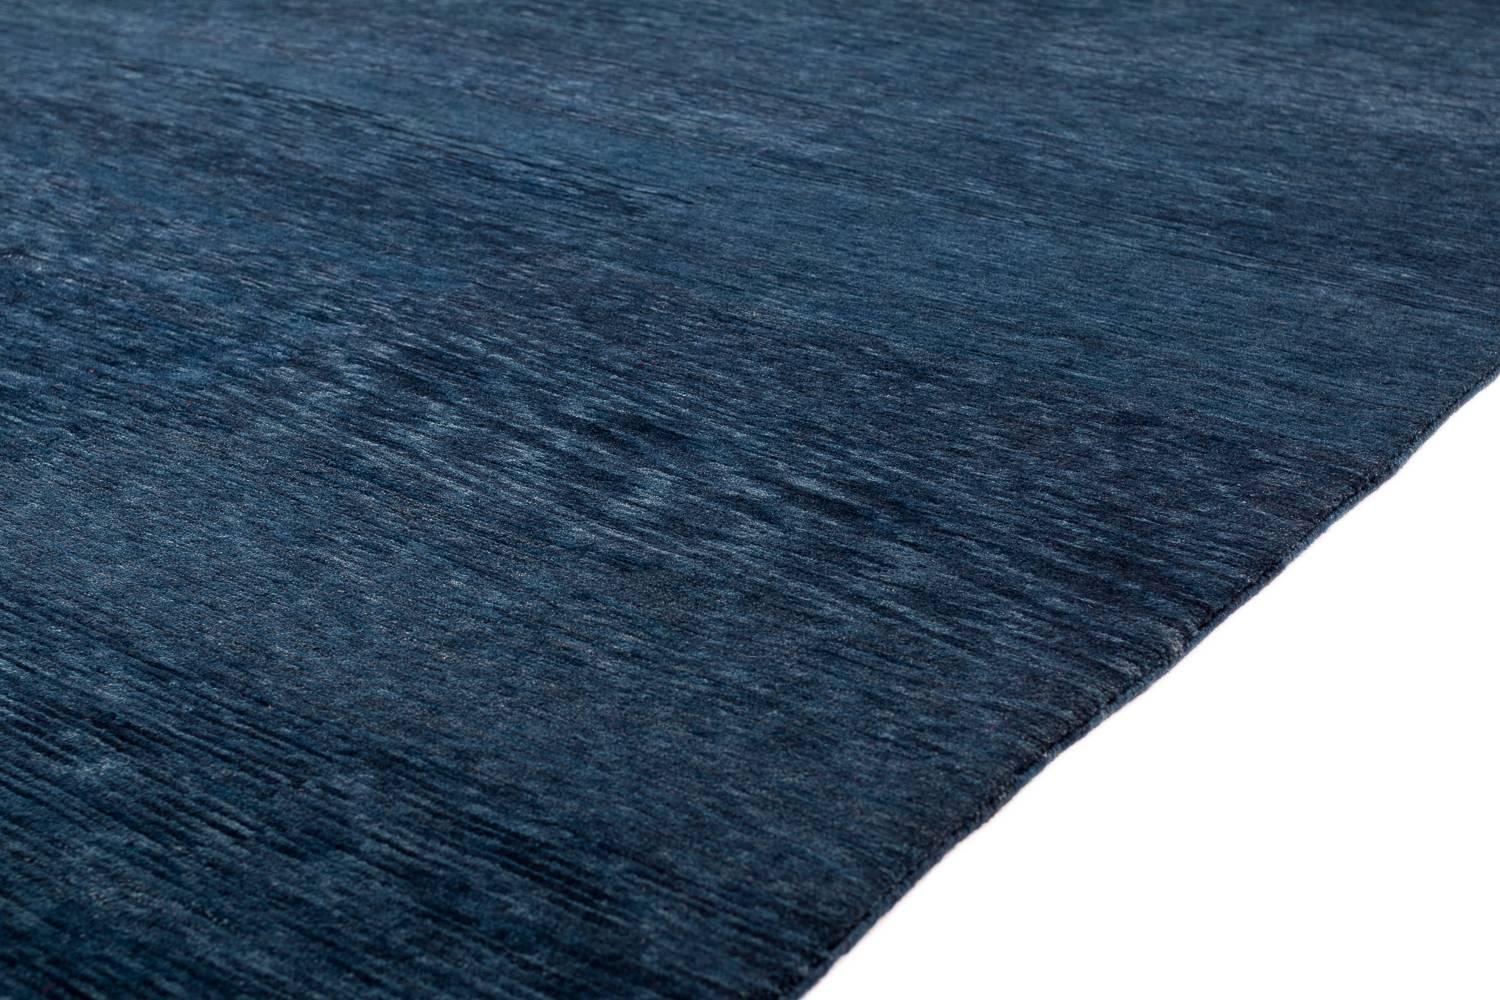 This hypnotic hand dyed indigo carpet was made using hand spun Himalayan wool of the finest quality. The high lanolin content in the wool naturally repels liquid making it extremely resilient to stains. This carpet has a stunning abrash throughout.